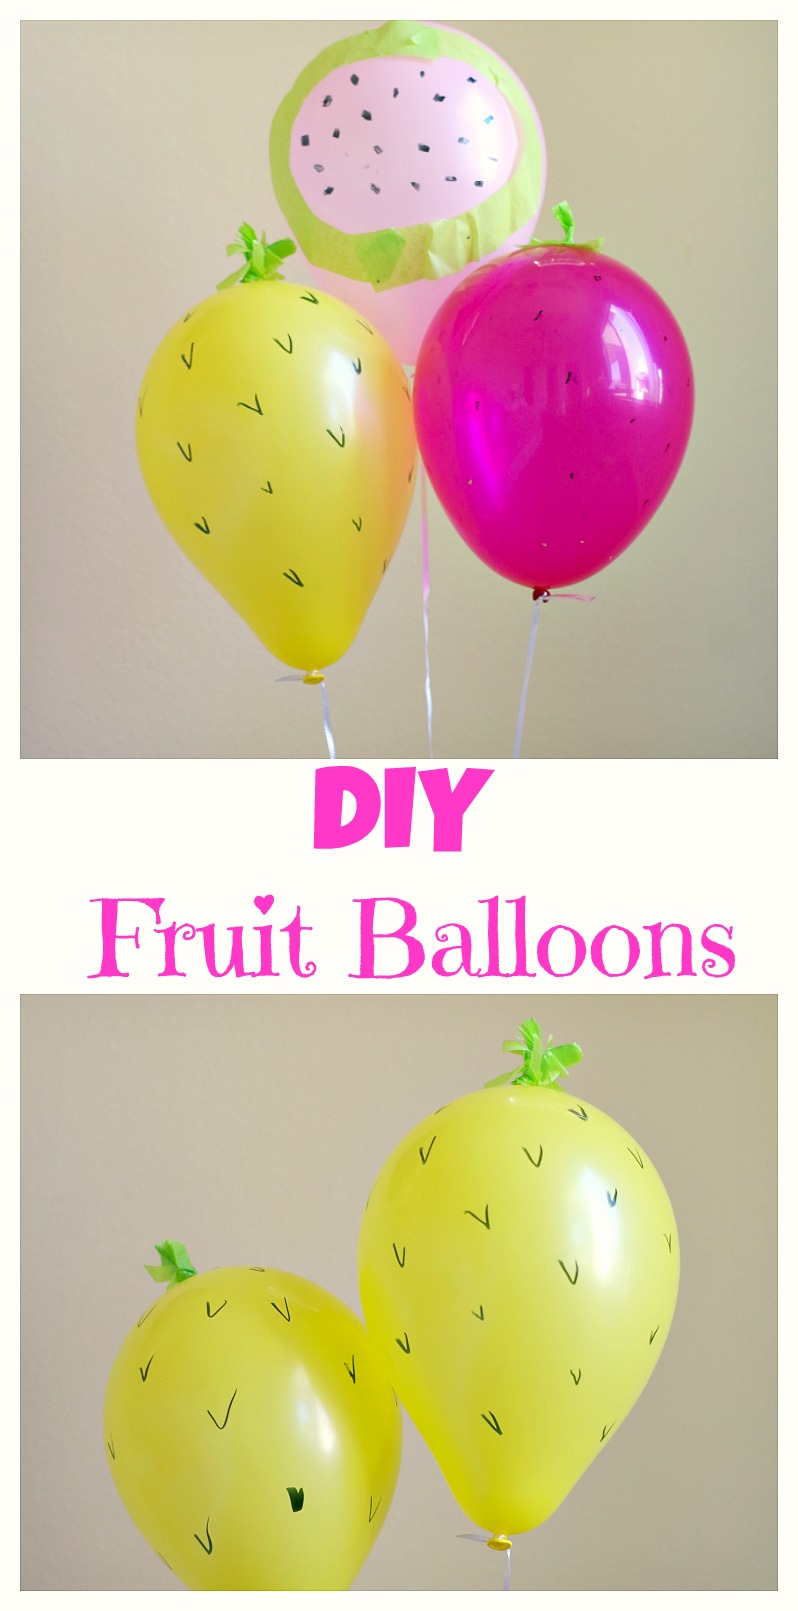 DIY Fruit Balloons! Celebrate summer by making these simple DIY balloons.